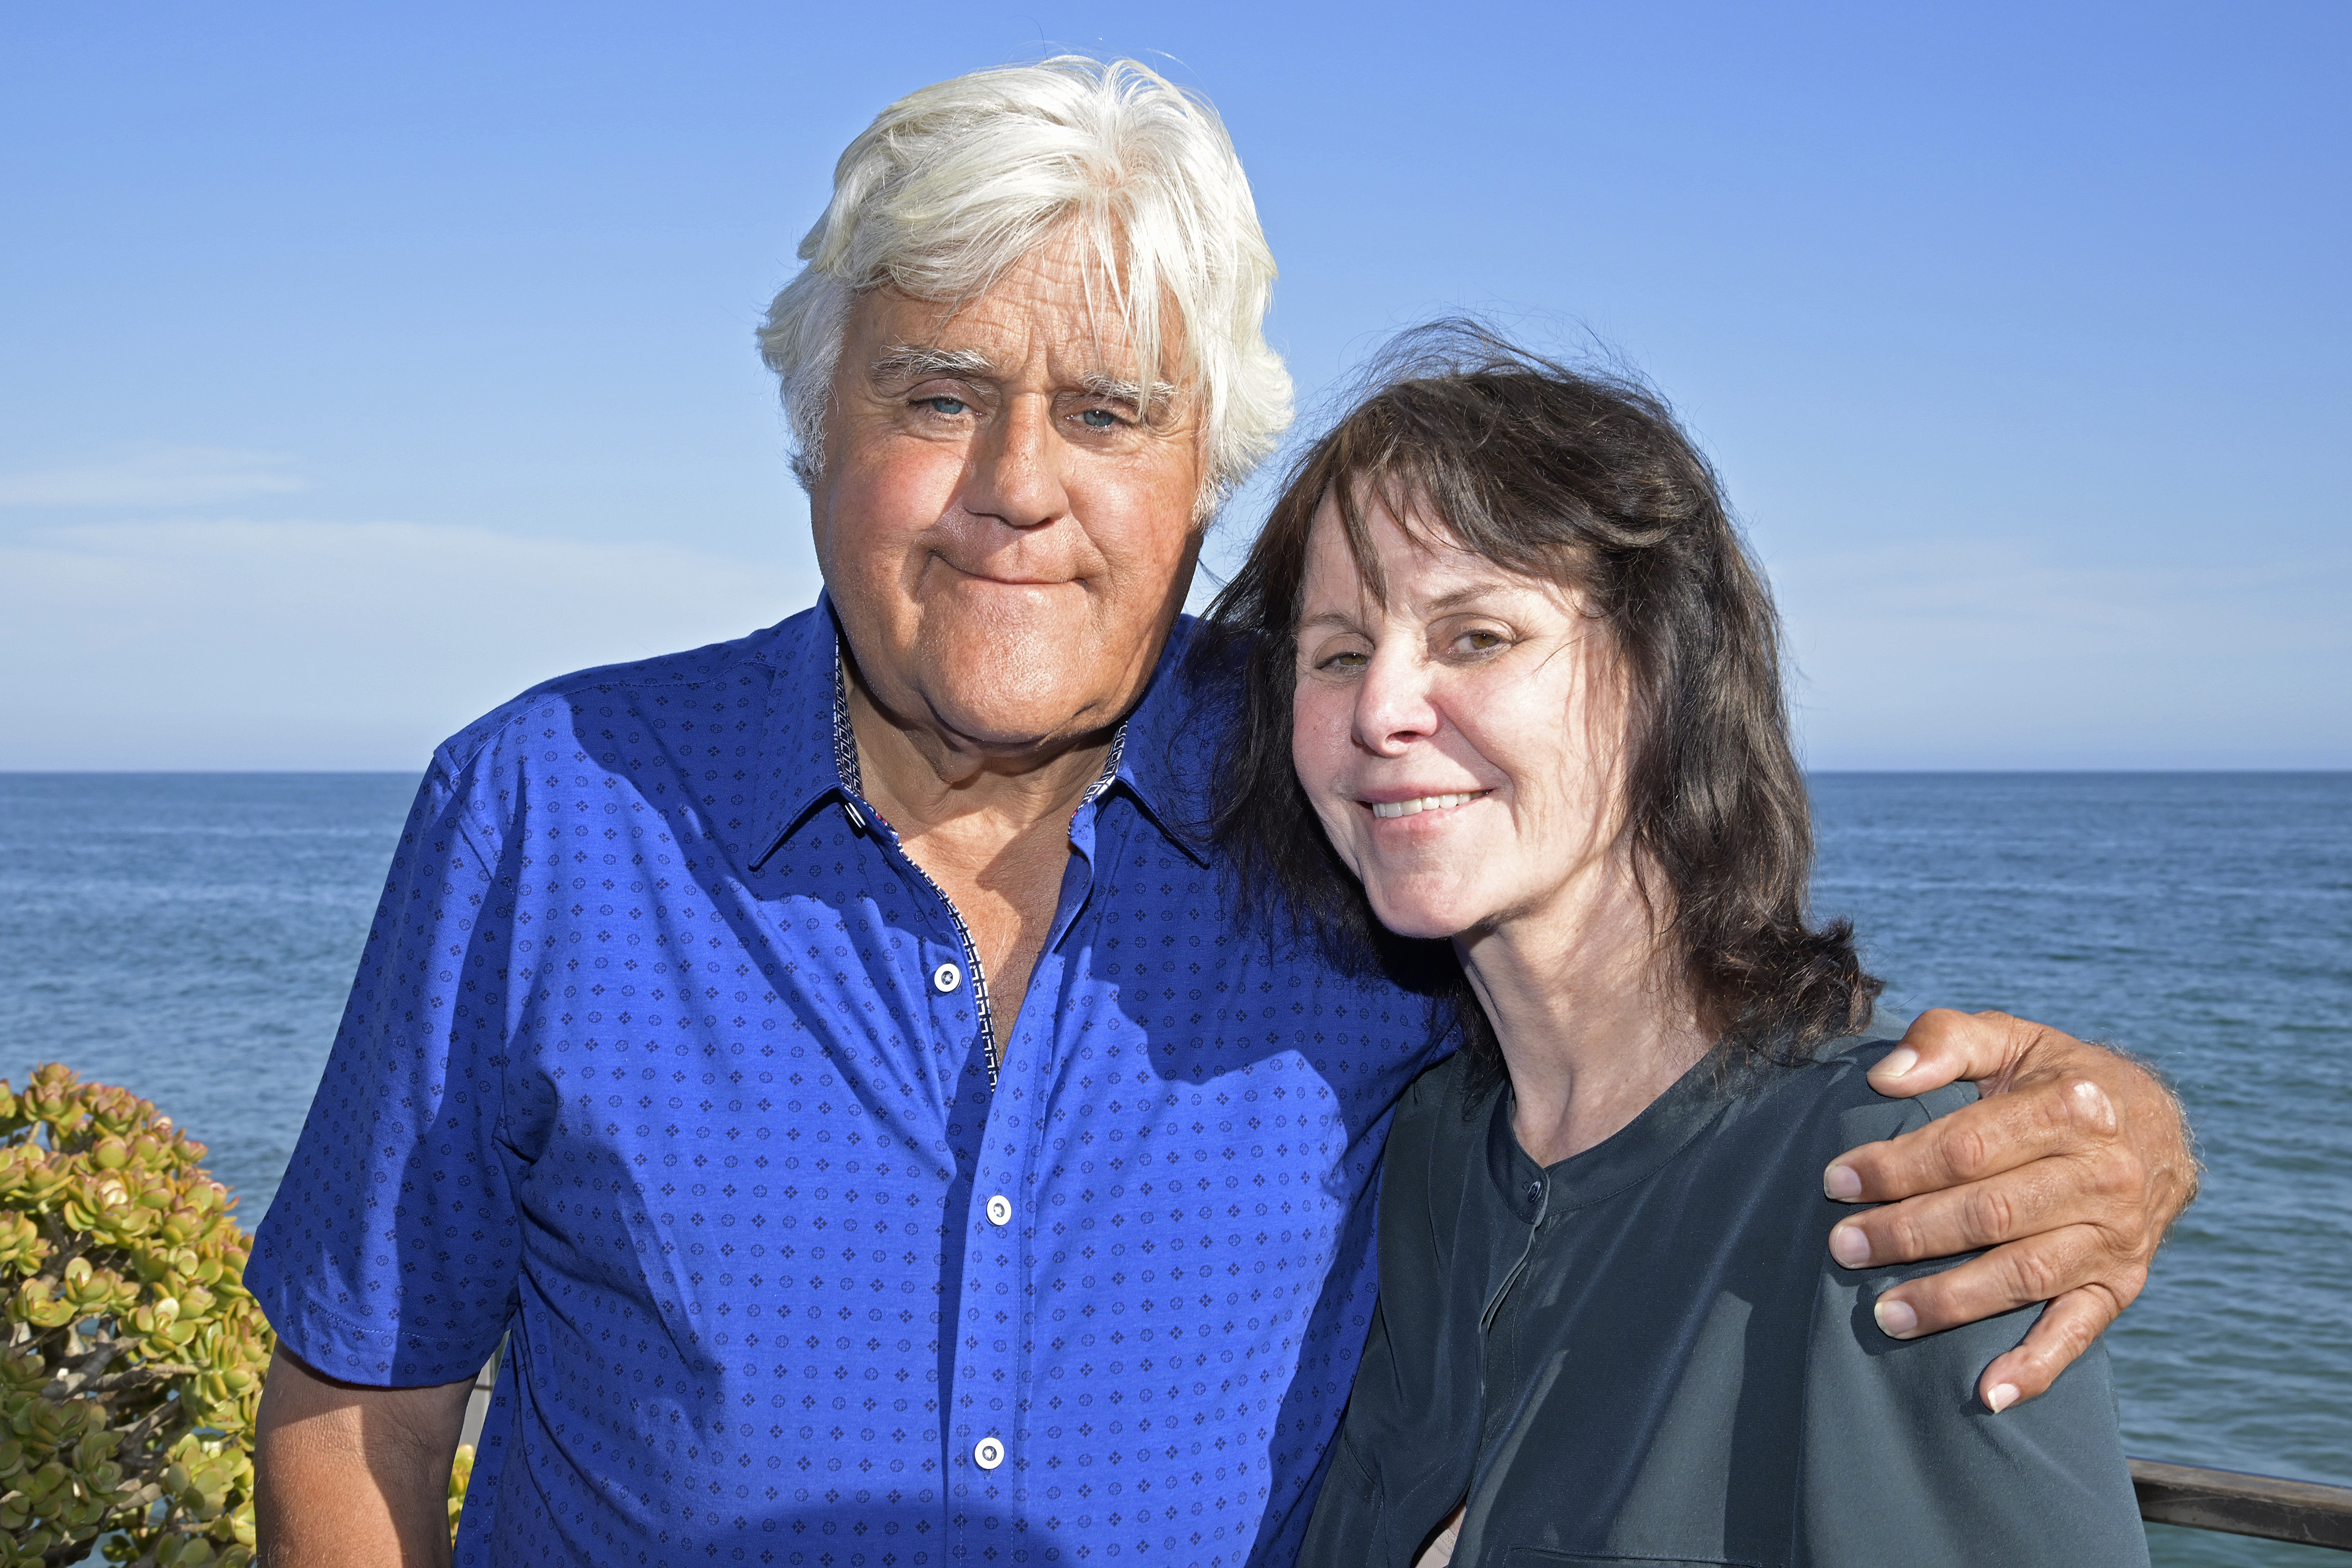 Jay and Mavis Leno at the private unveiling of the Meyers Manx electric automobile in Malibu, California on August 8, 2022 | Source: Getty Images